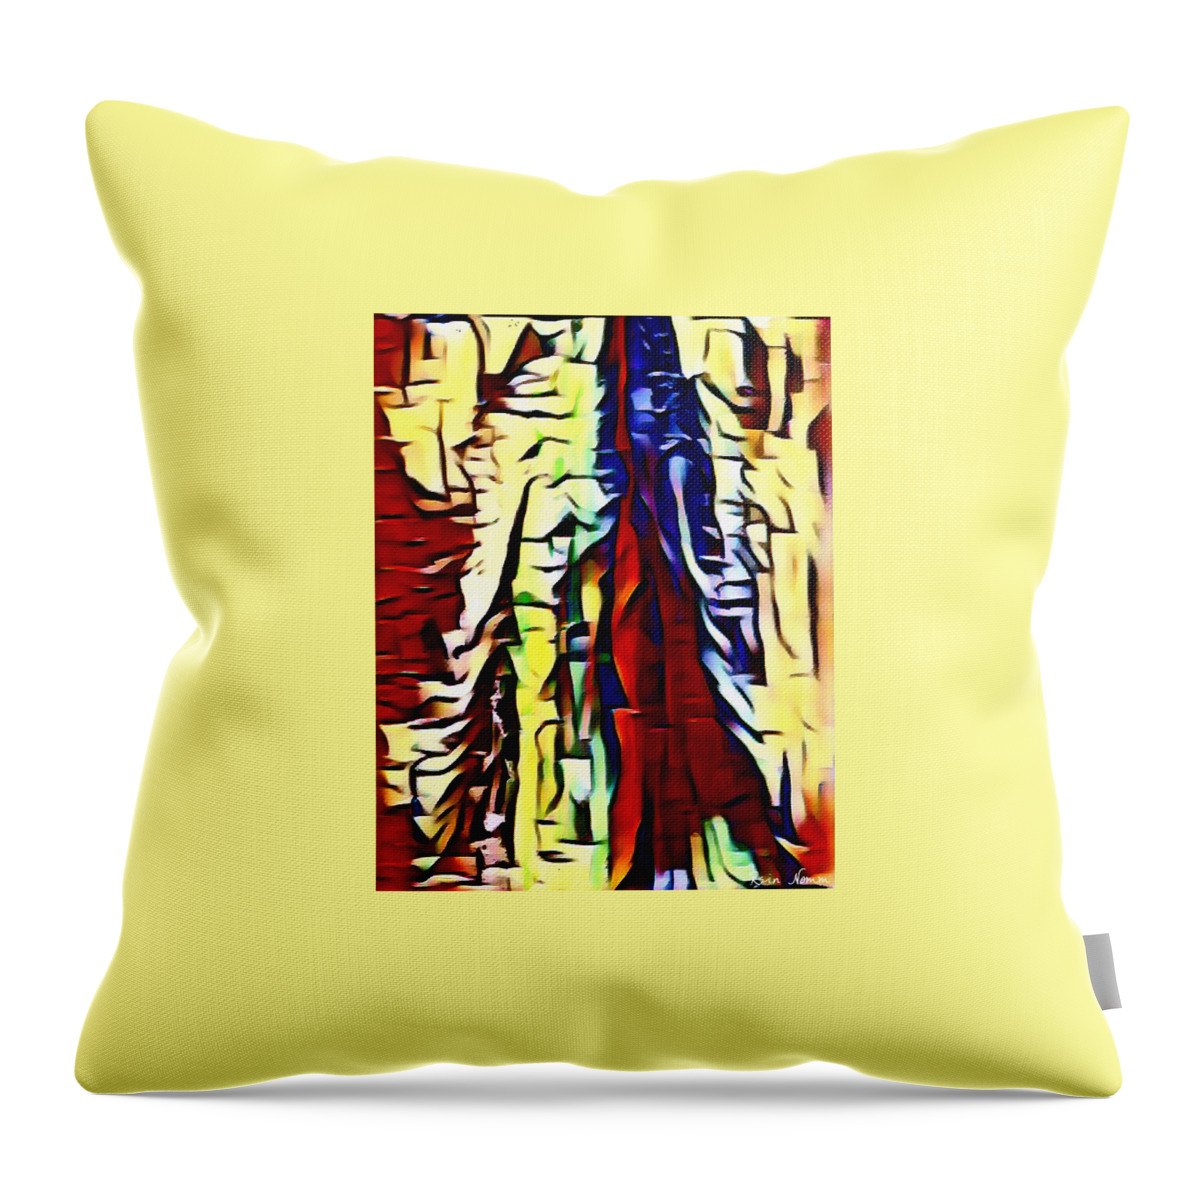  Throw Pillow featuring the digital art Burning the Future by Rein Nomm